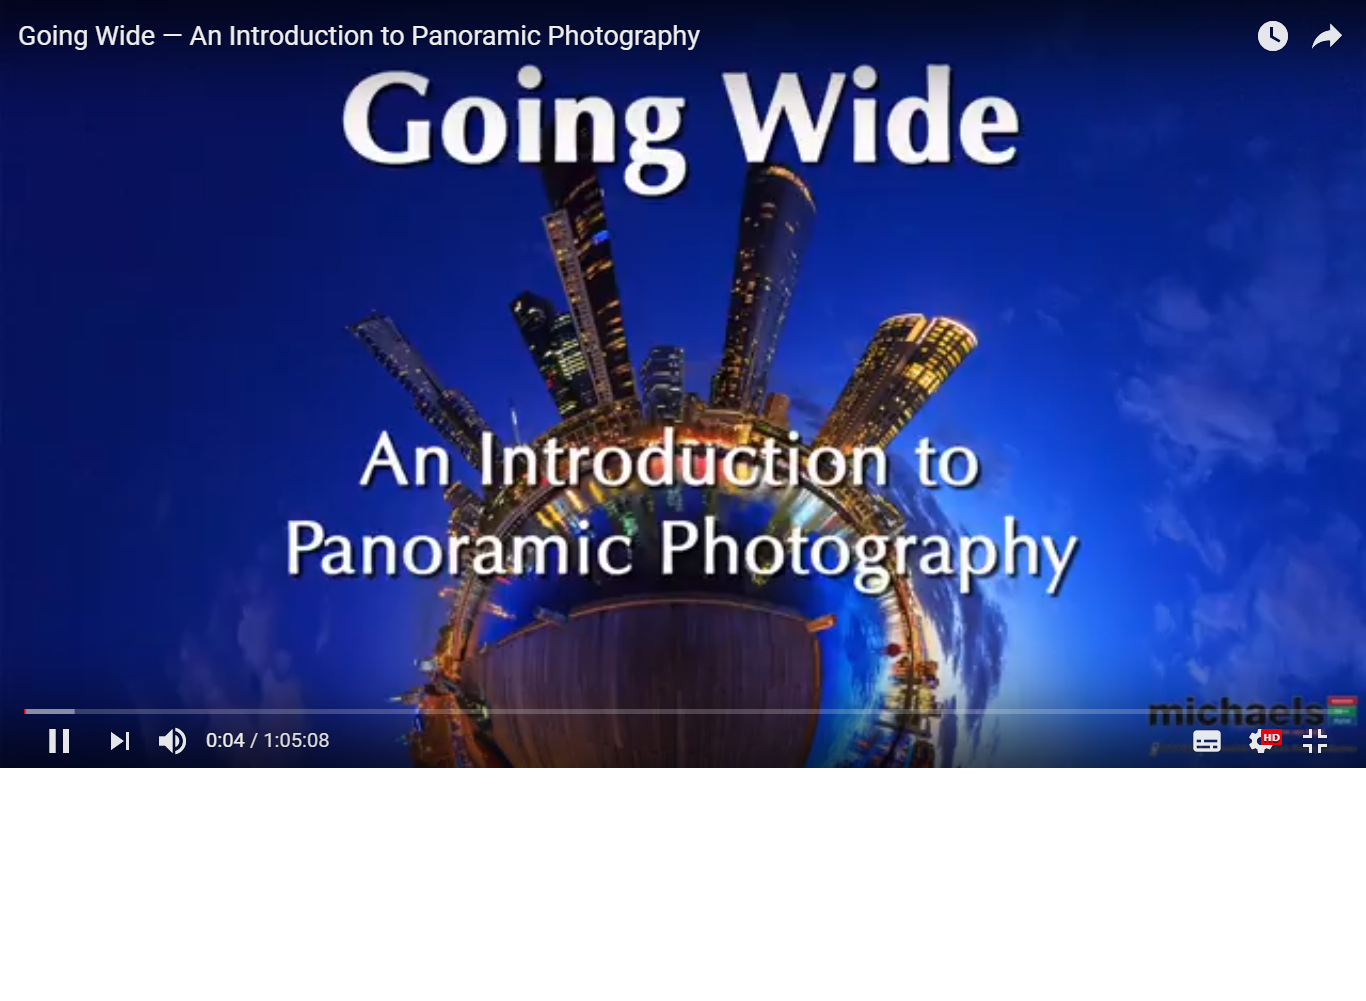 Going Wide — An Introduction to Panoramic Photography